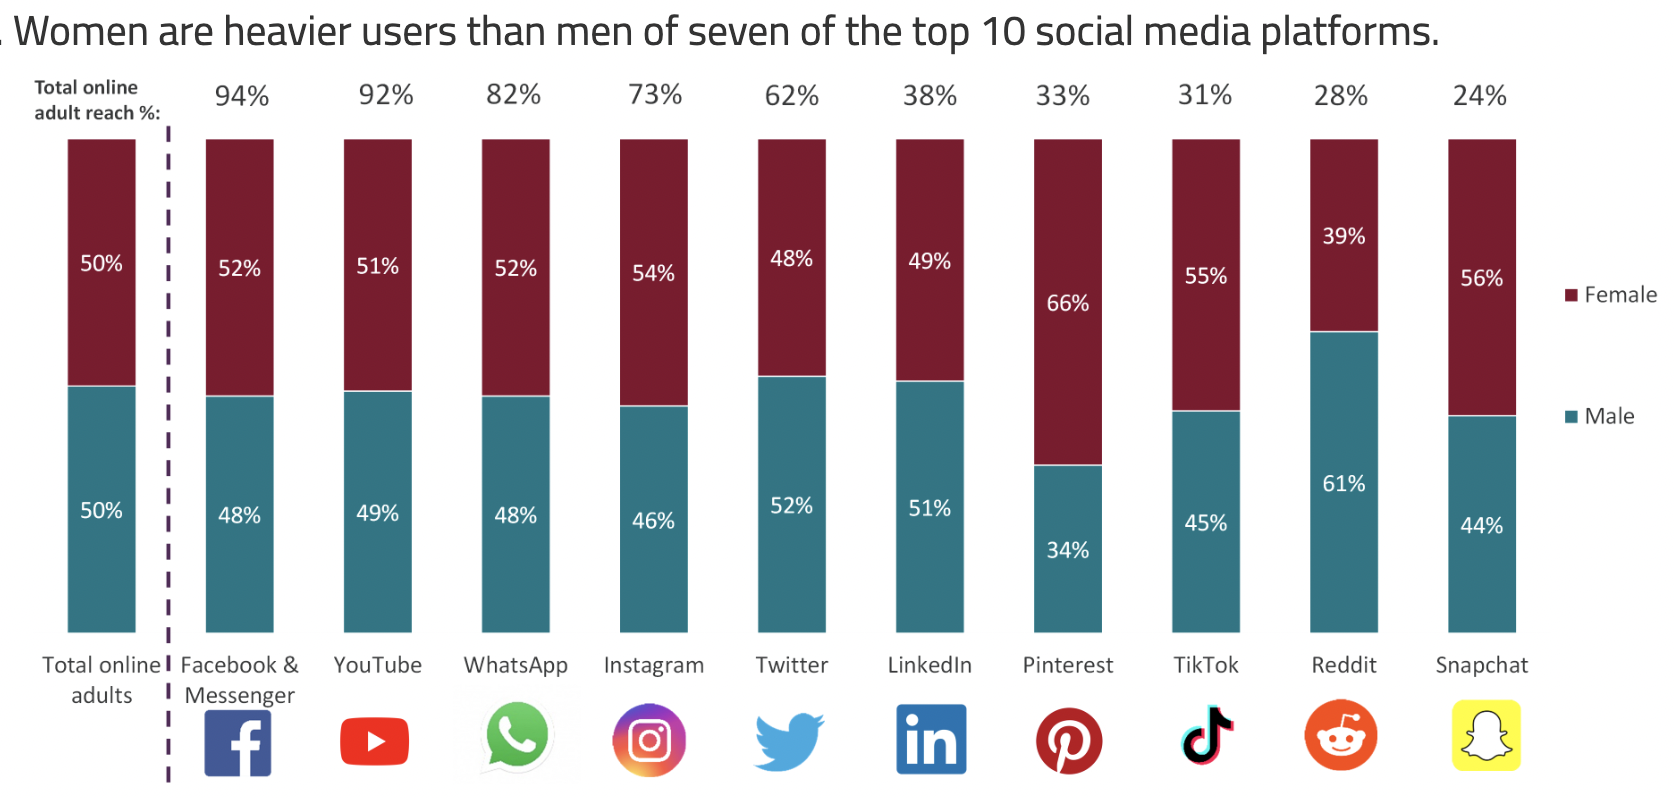 Chart from Ofcom online habits research showing gender difference in usage of major social media services